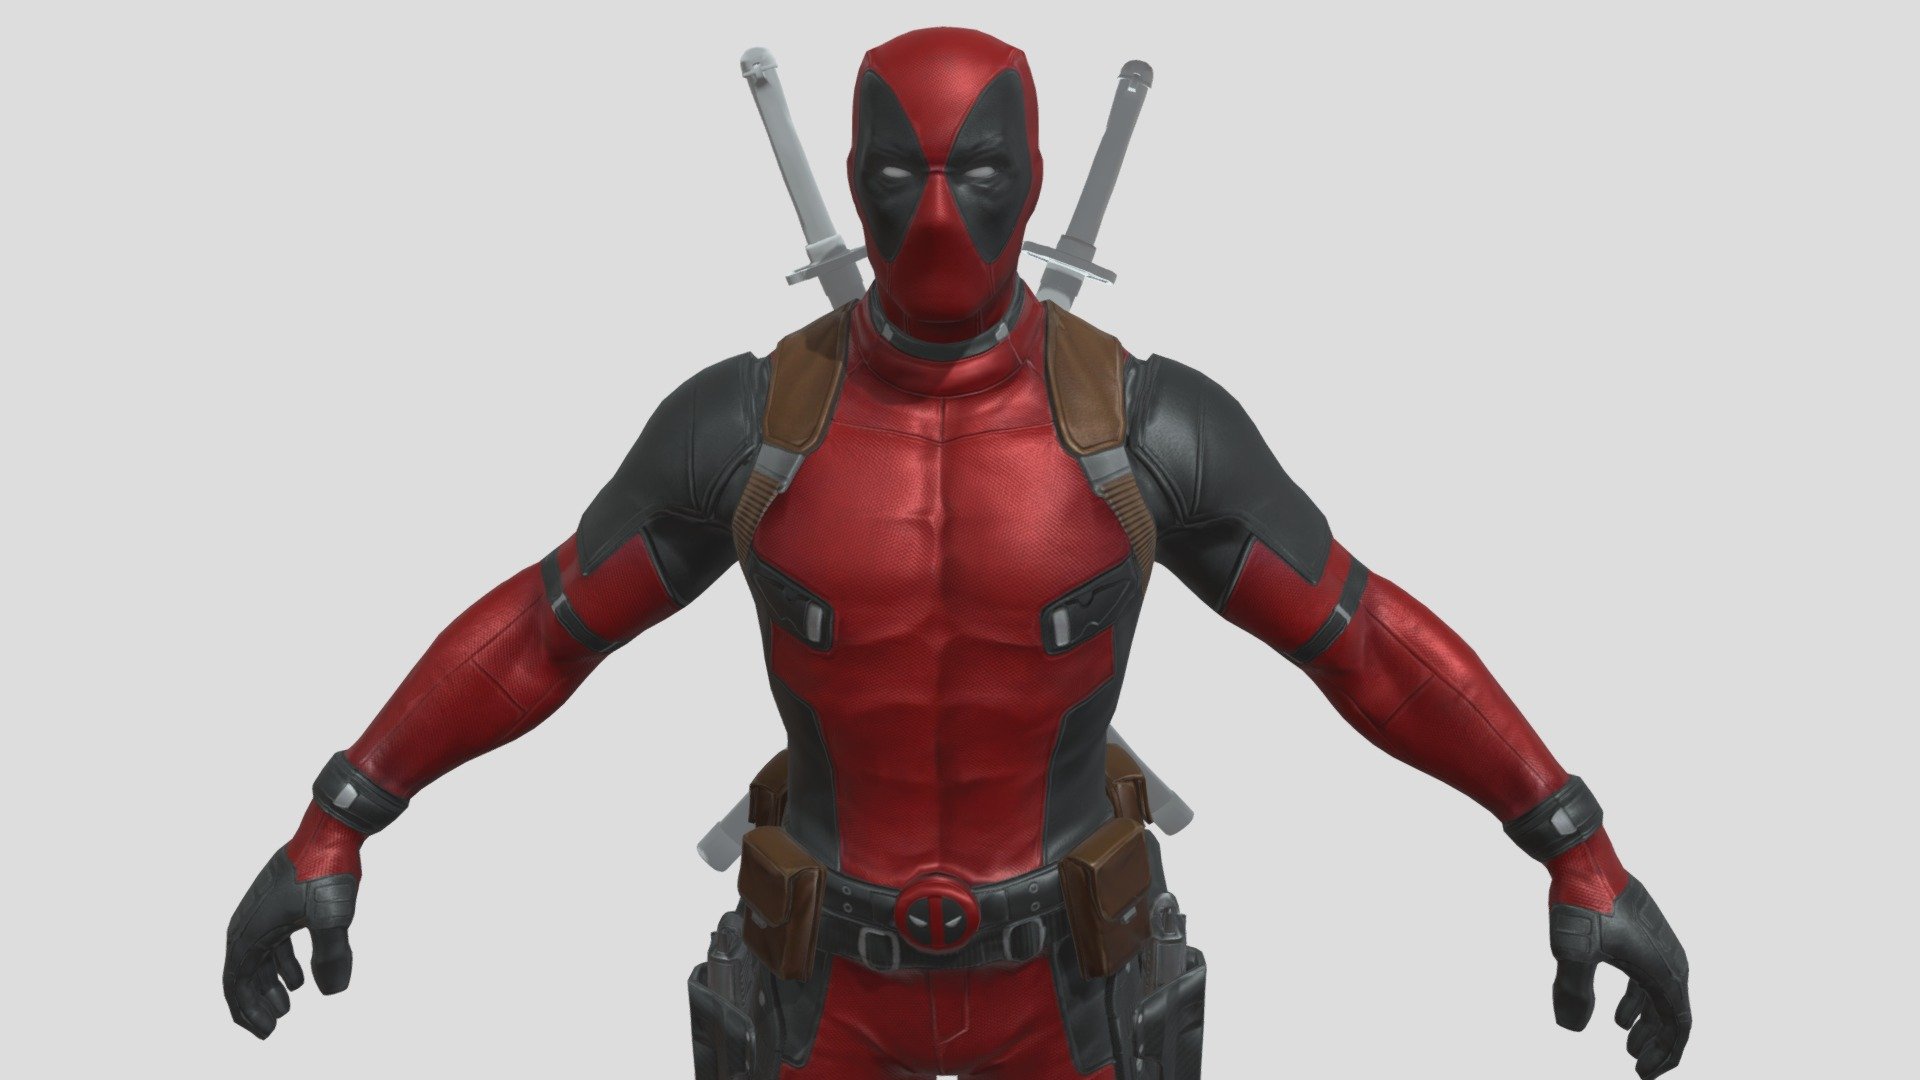 Deadpool is a 2016 American superhero film based on the Marvel Comics character of the same name. Distributed by 20th Century Fox, it is a spin-off in the X-Men film series and the eighth installment overall. Directed by Tim Miller (in his feature directorial debut) and written by Rhett Reese and Paul Wernick, it stars Ryan Reynolds in the title role alongside Morena Baccarin, Ed Skrein, T. J. Miller, Gina Carano, and Brianna Hildebrand. In the film, Wade Wilson hunts the man who gave him mutant abilities and a scarred physical appearance, becoming the antihero Deadpool 3d model